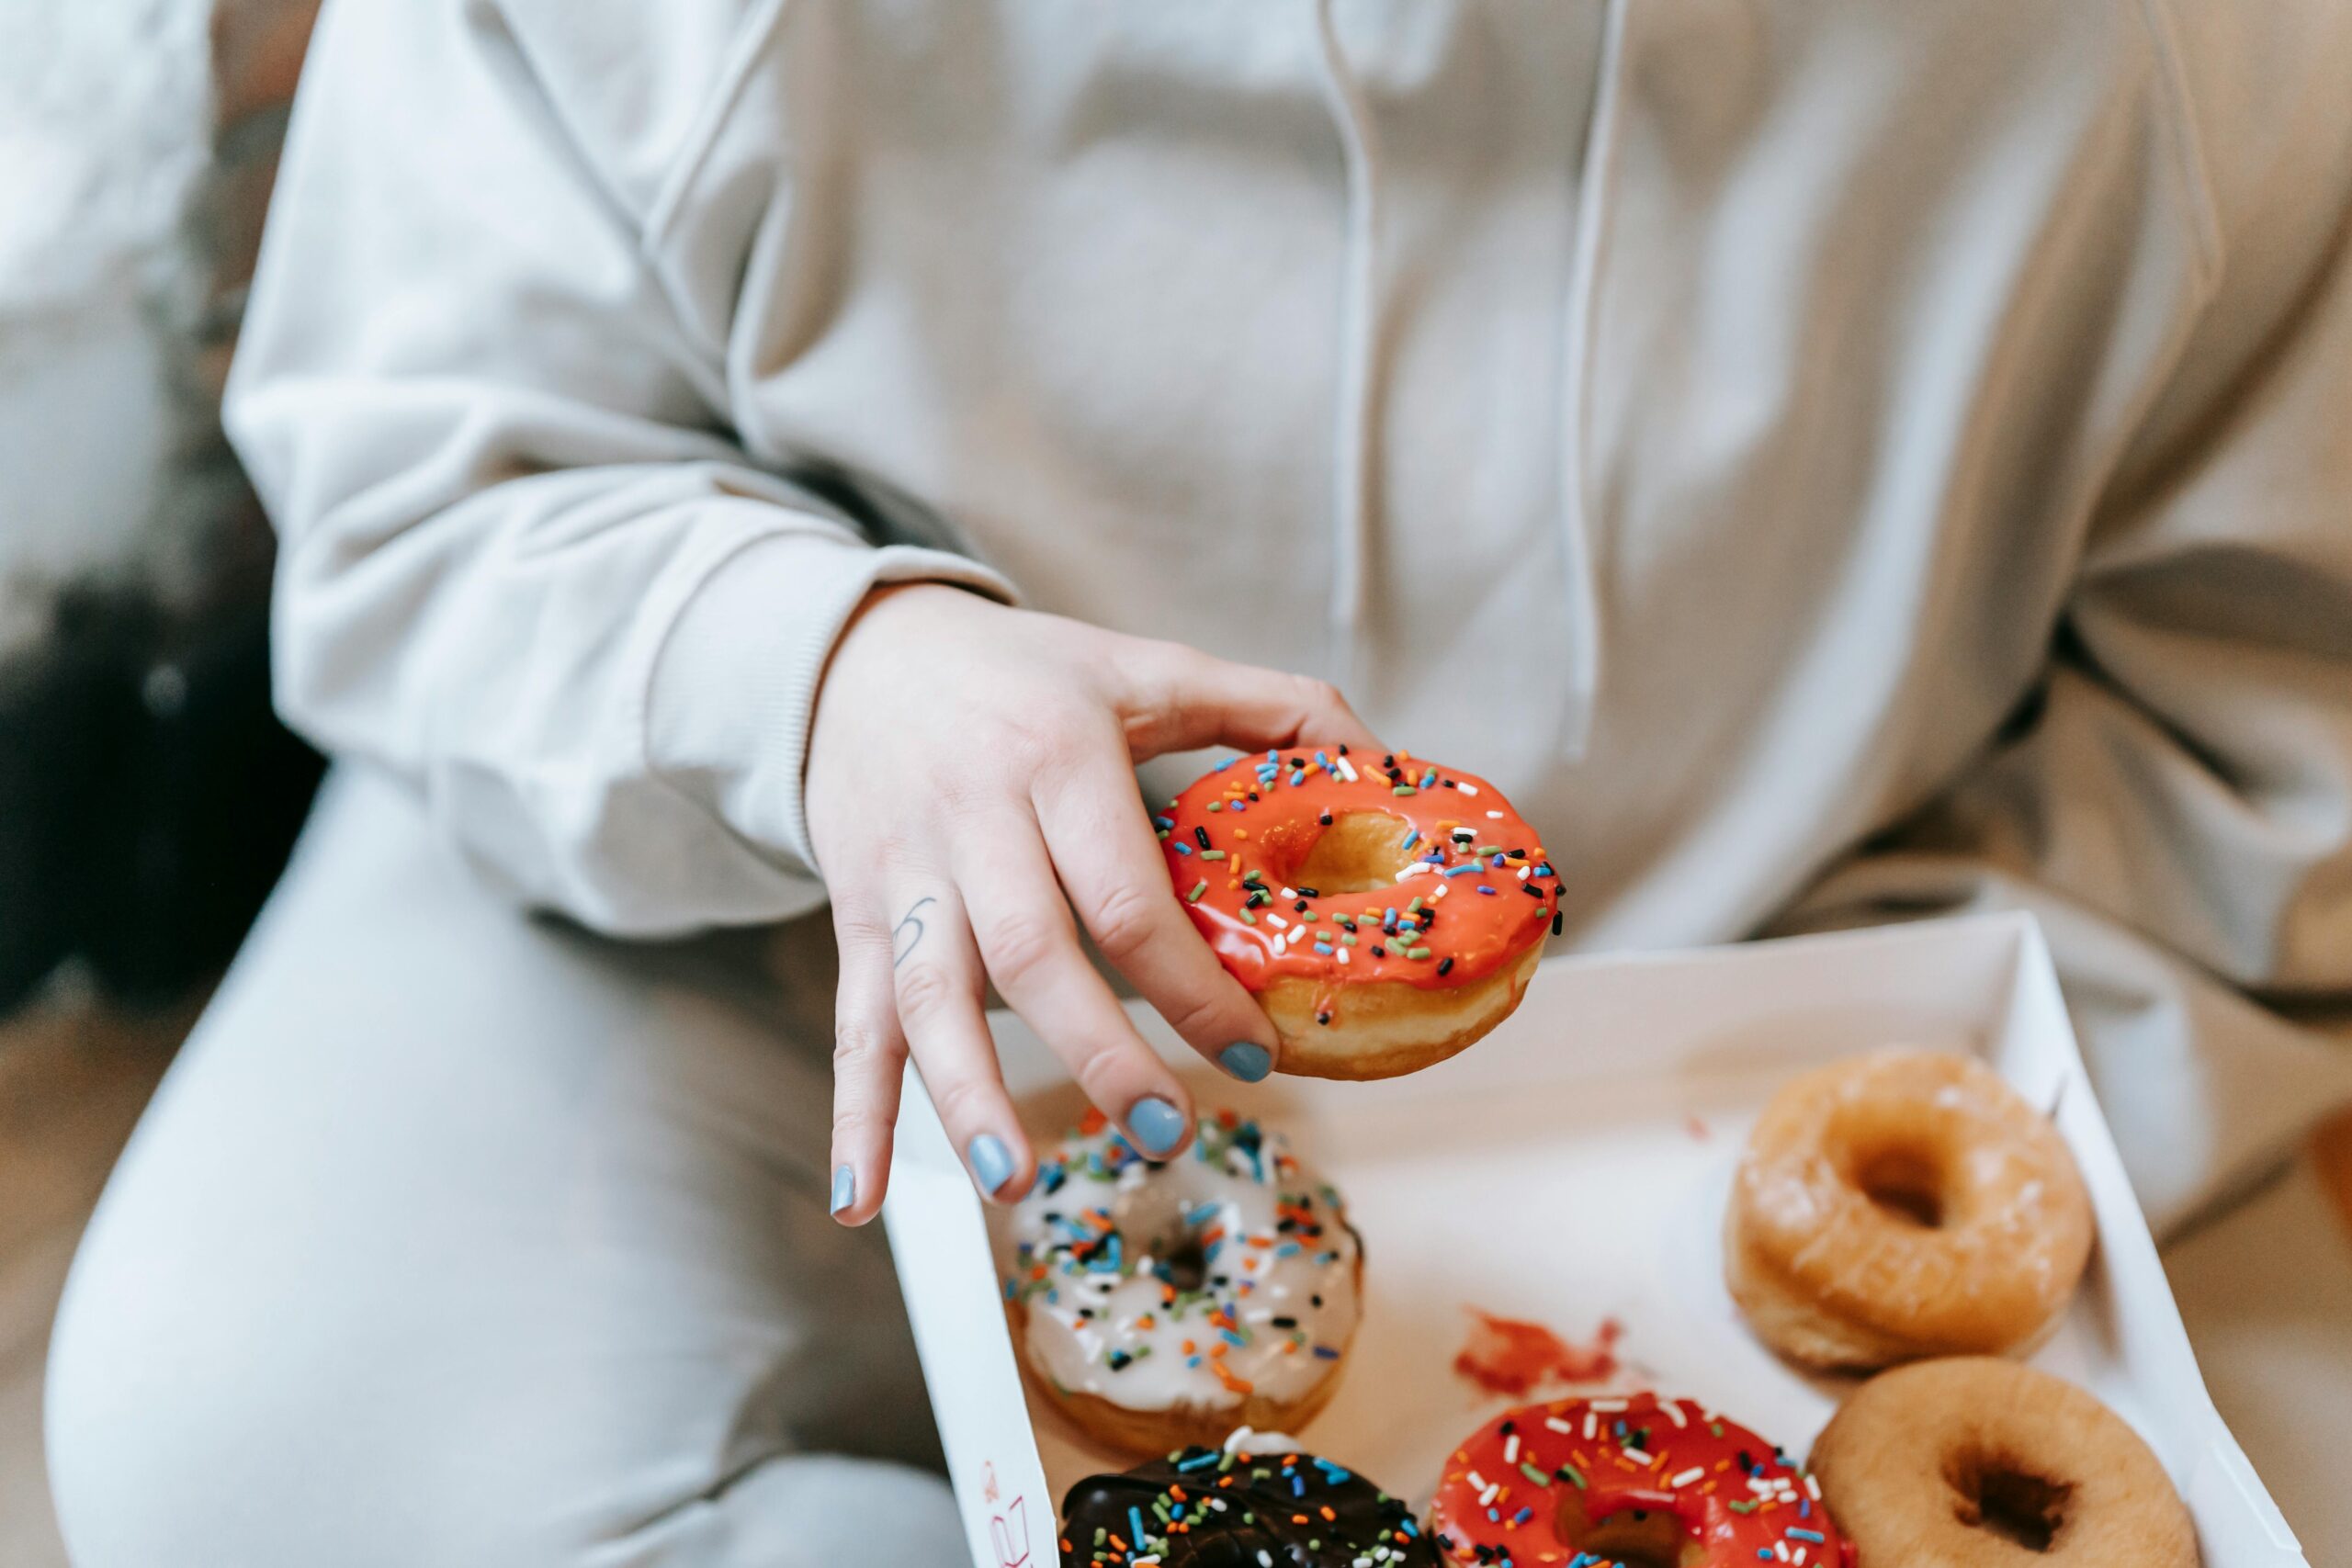 A person holding a colorful sprinkled donut, highlighting the theme of sugar addiction as discussed in the blog post.